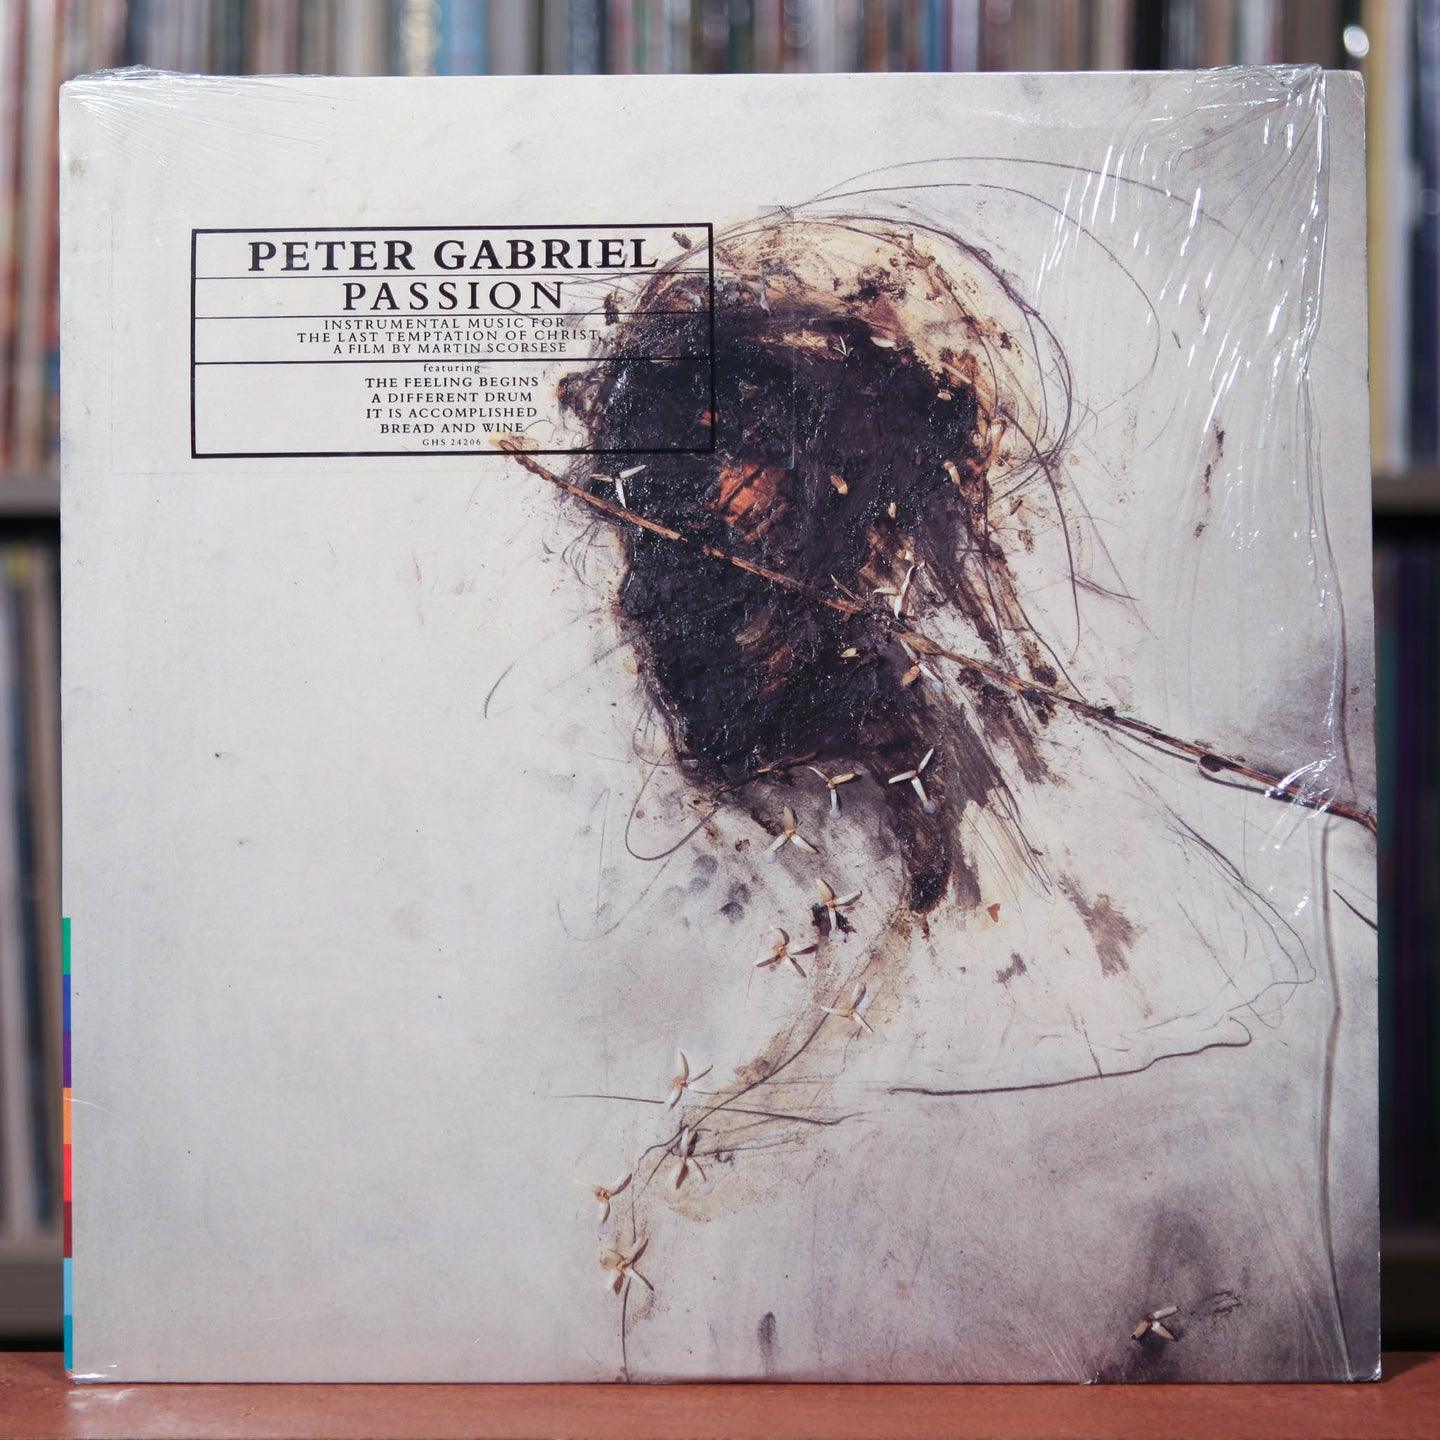 Peter Gabriel - Passion(Music For The Last Temptation) - 1989 Geffen, VG+/EX w/Shrink and Hype